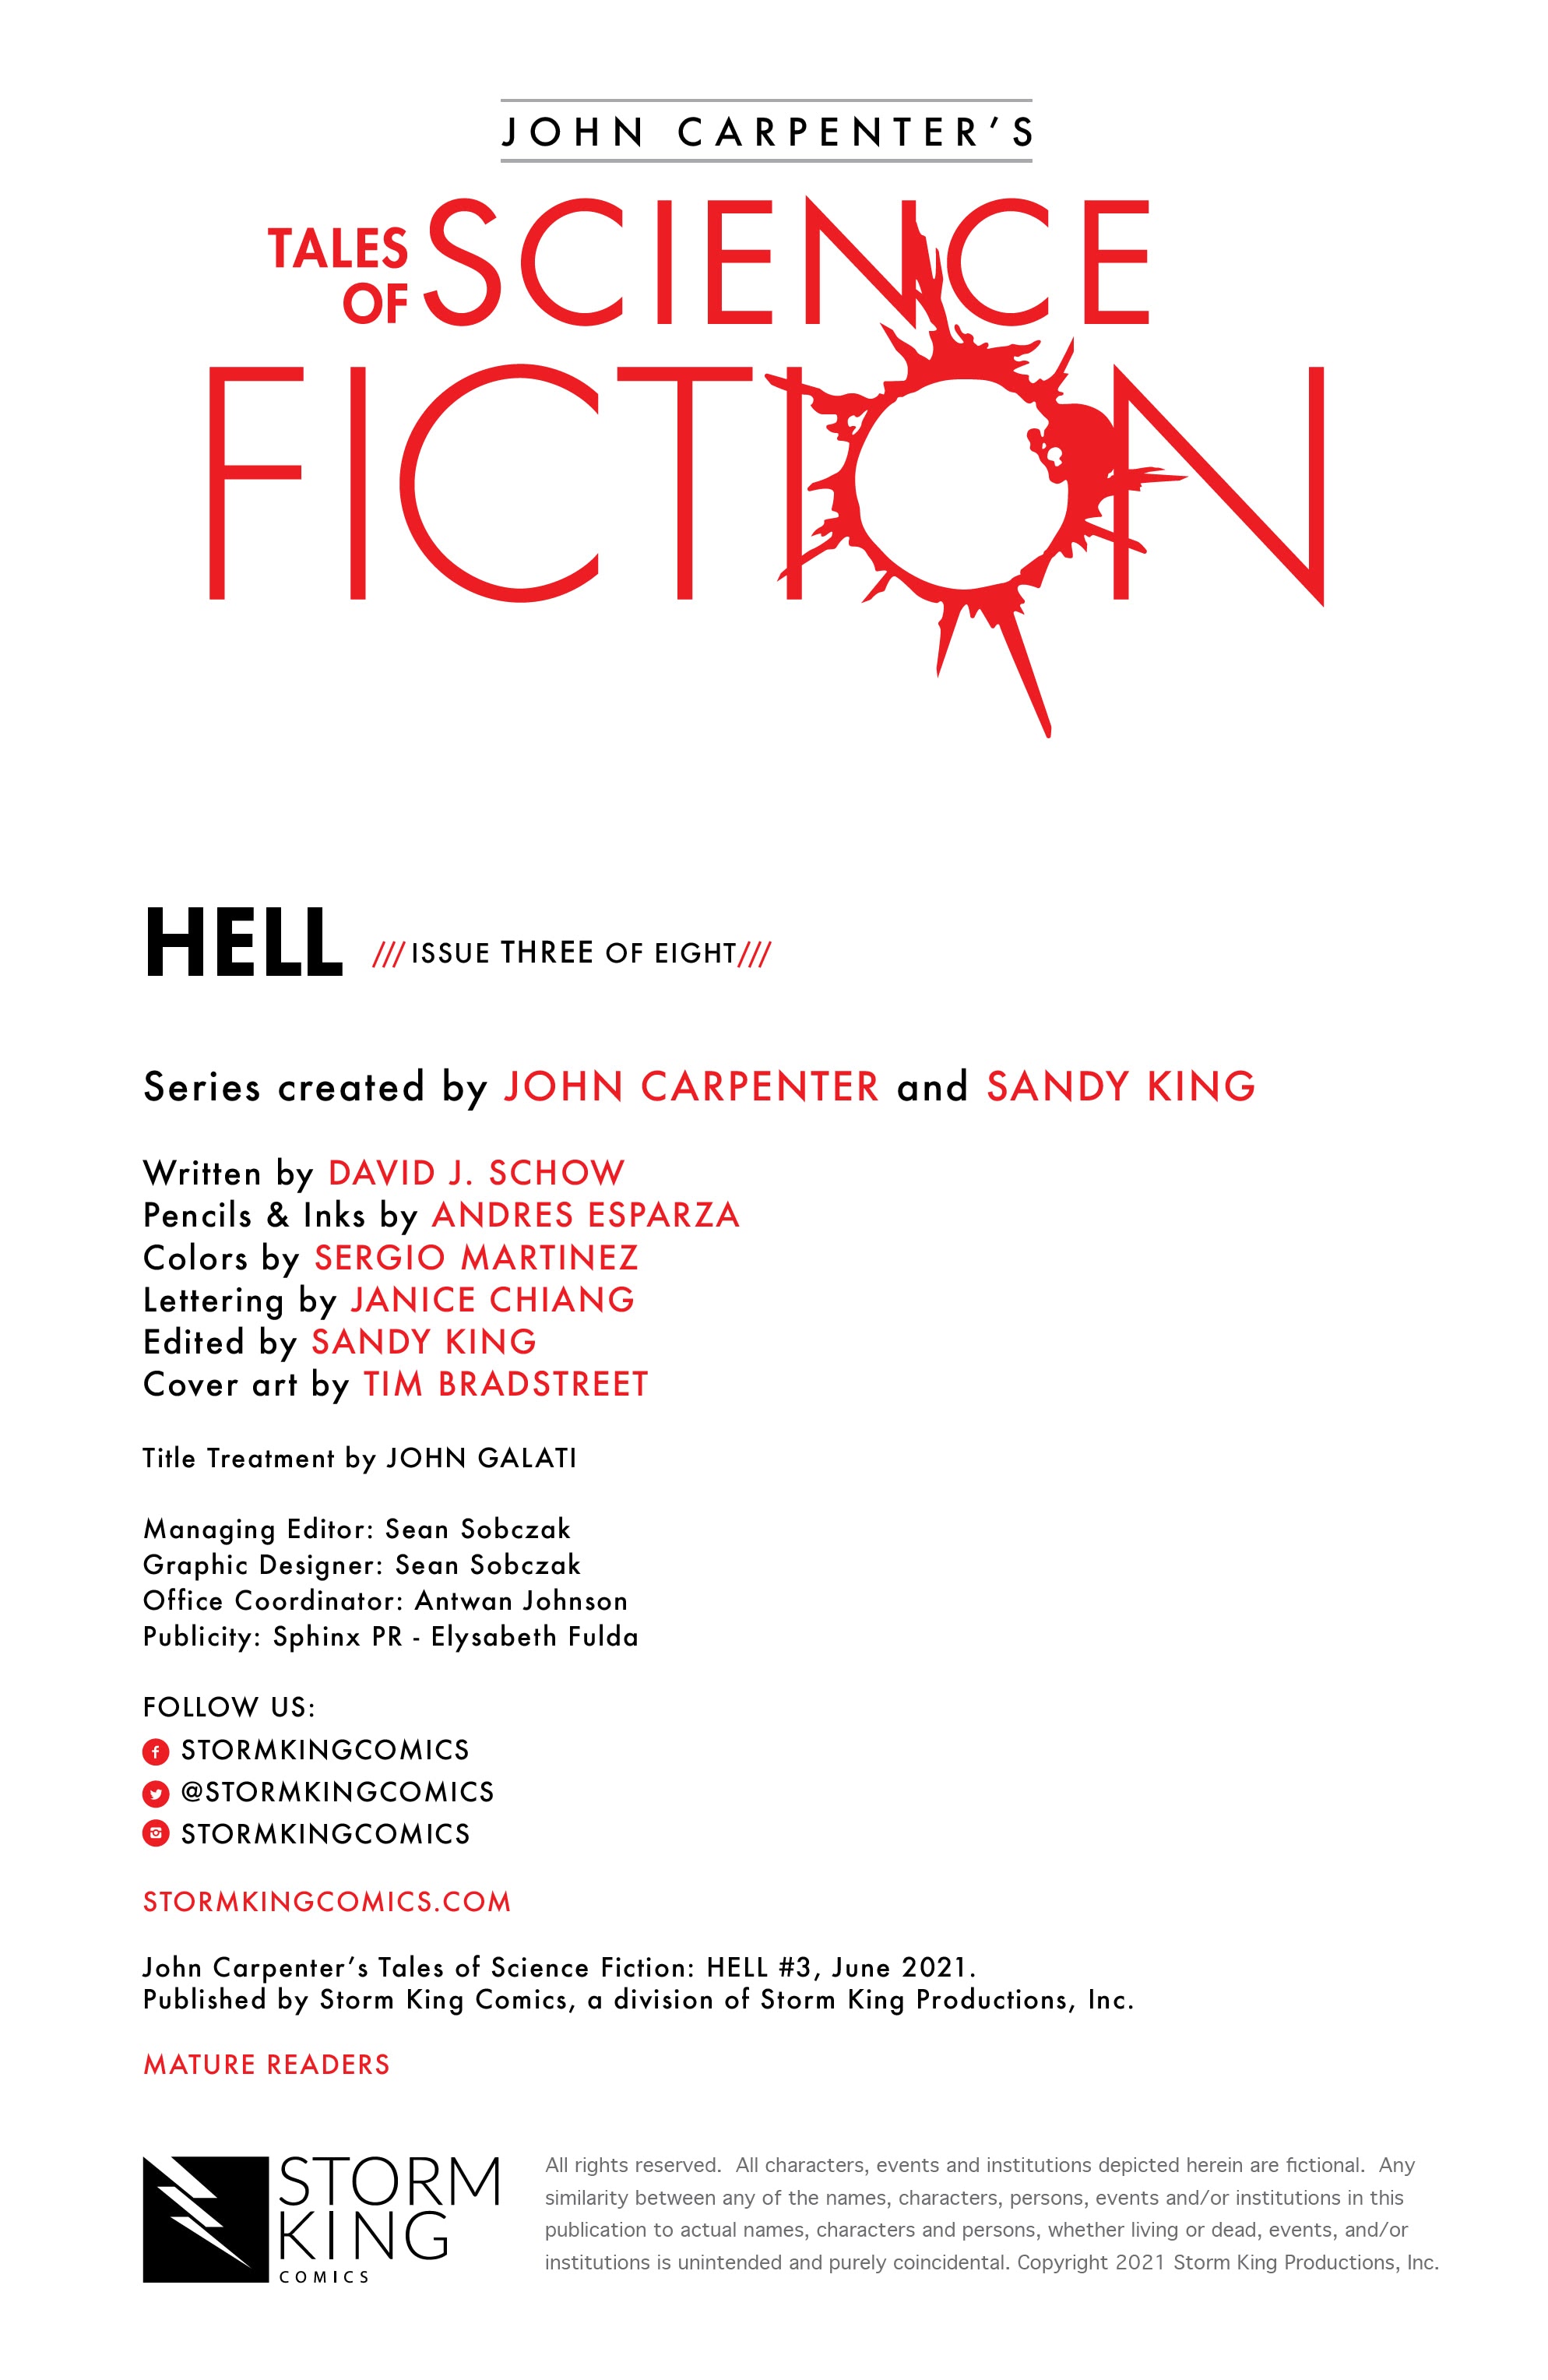 Read online John Carpenter's Tales of Science Fiction: HELL comic -  Issue #3 - 2